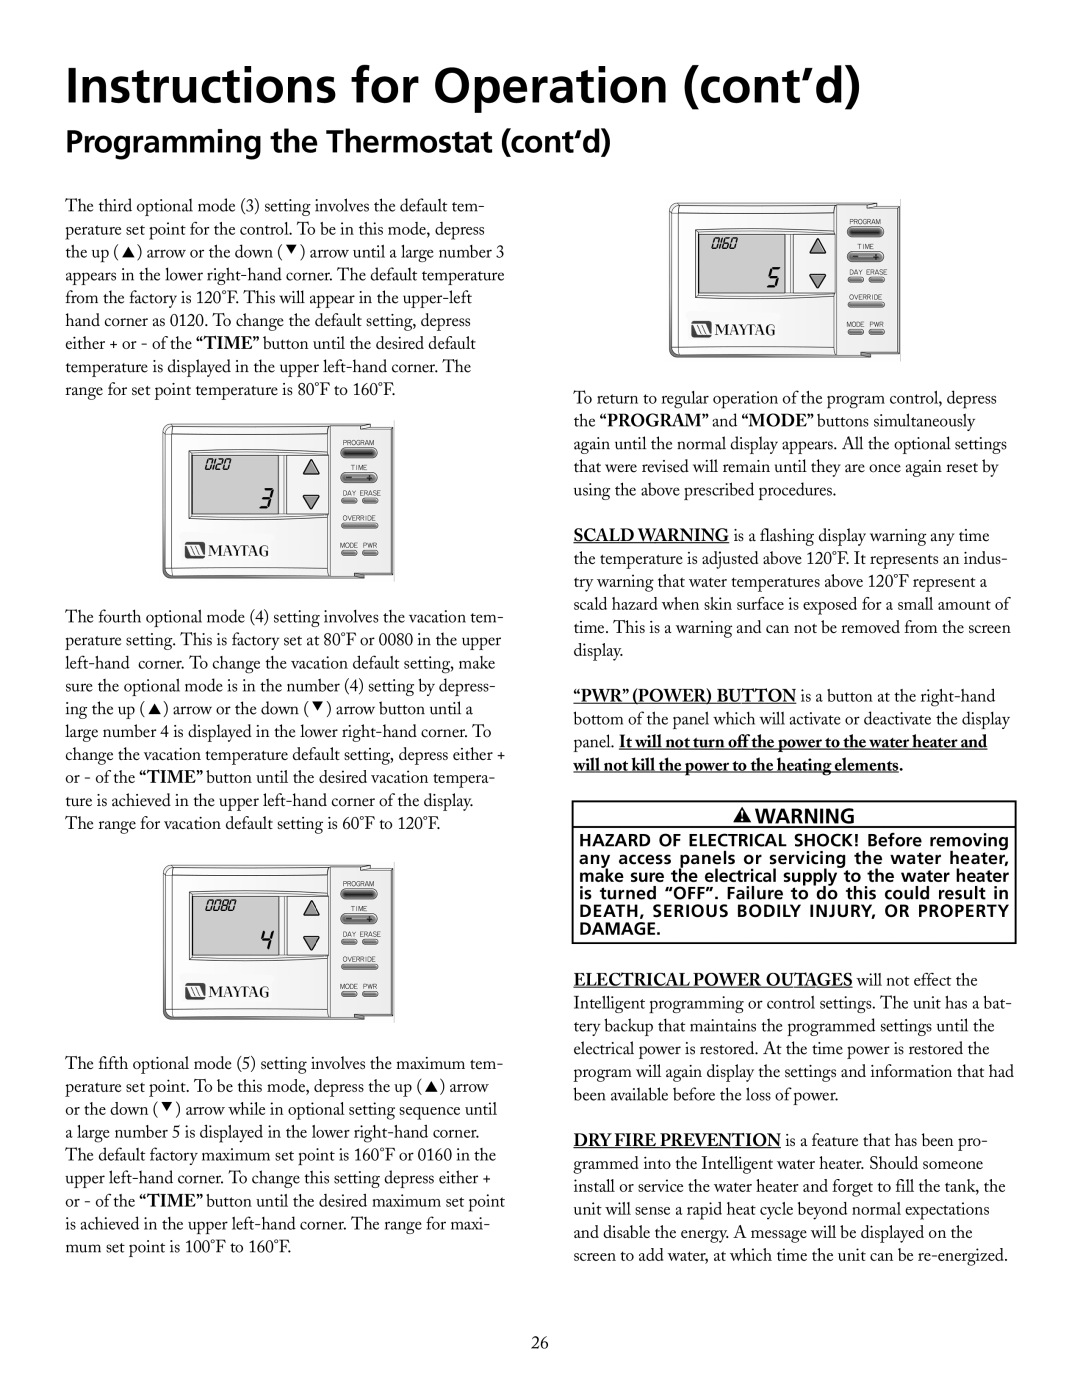 Maytag HRE21250PC, HRE21282PC manual will not kill the power to the heating elements, Instructions for Operation cont’d 